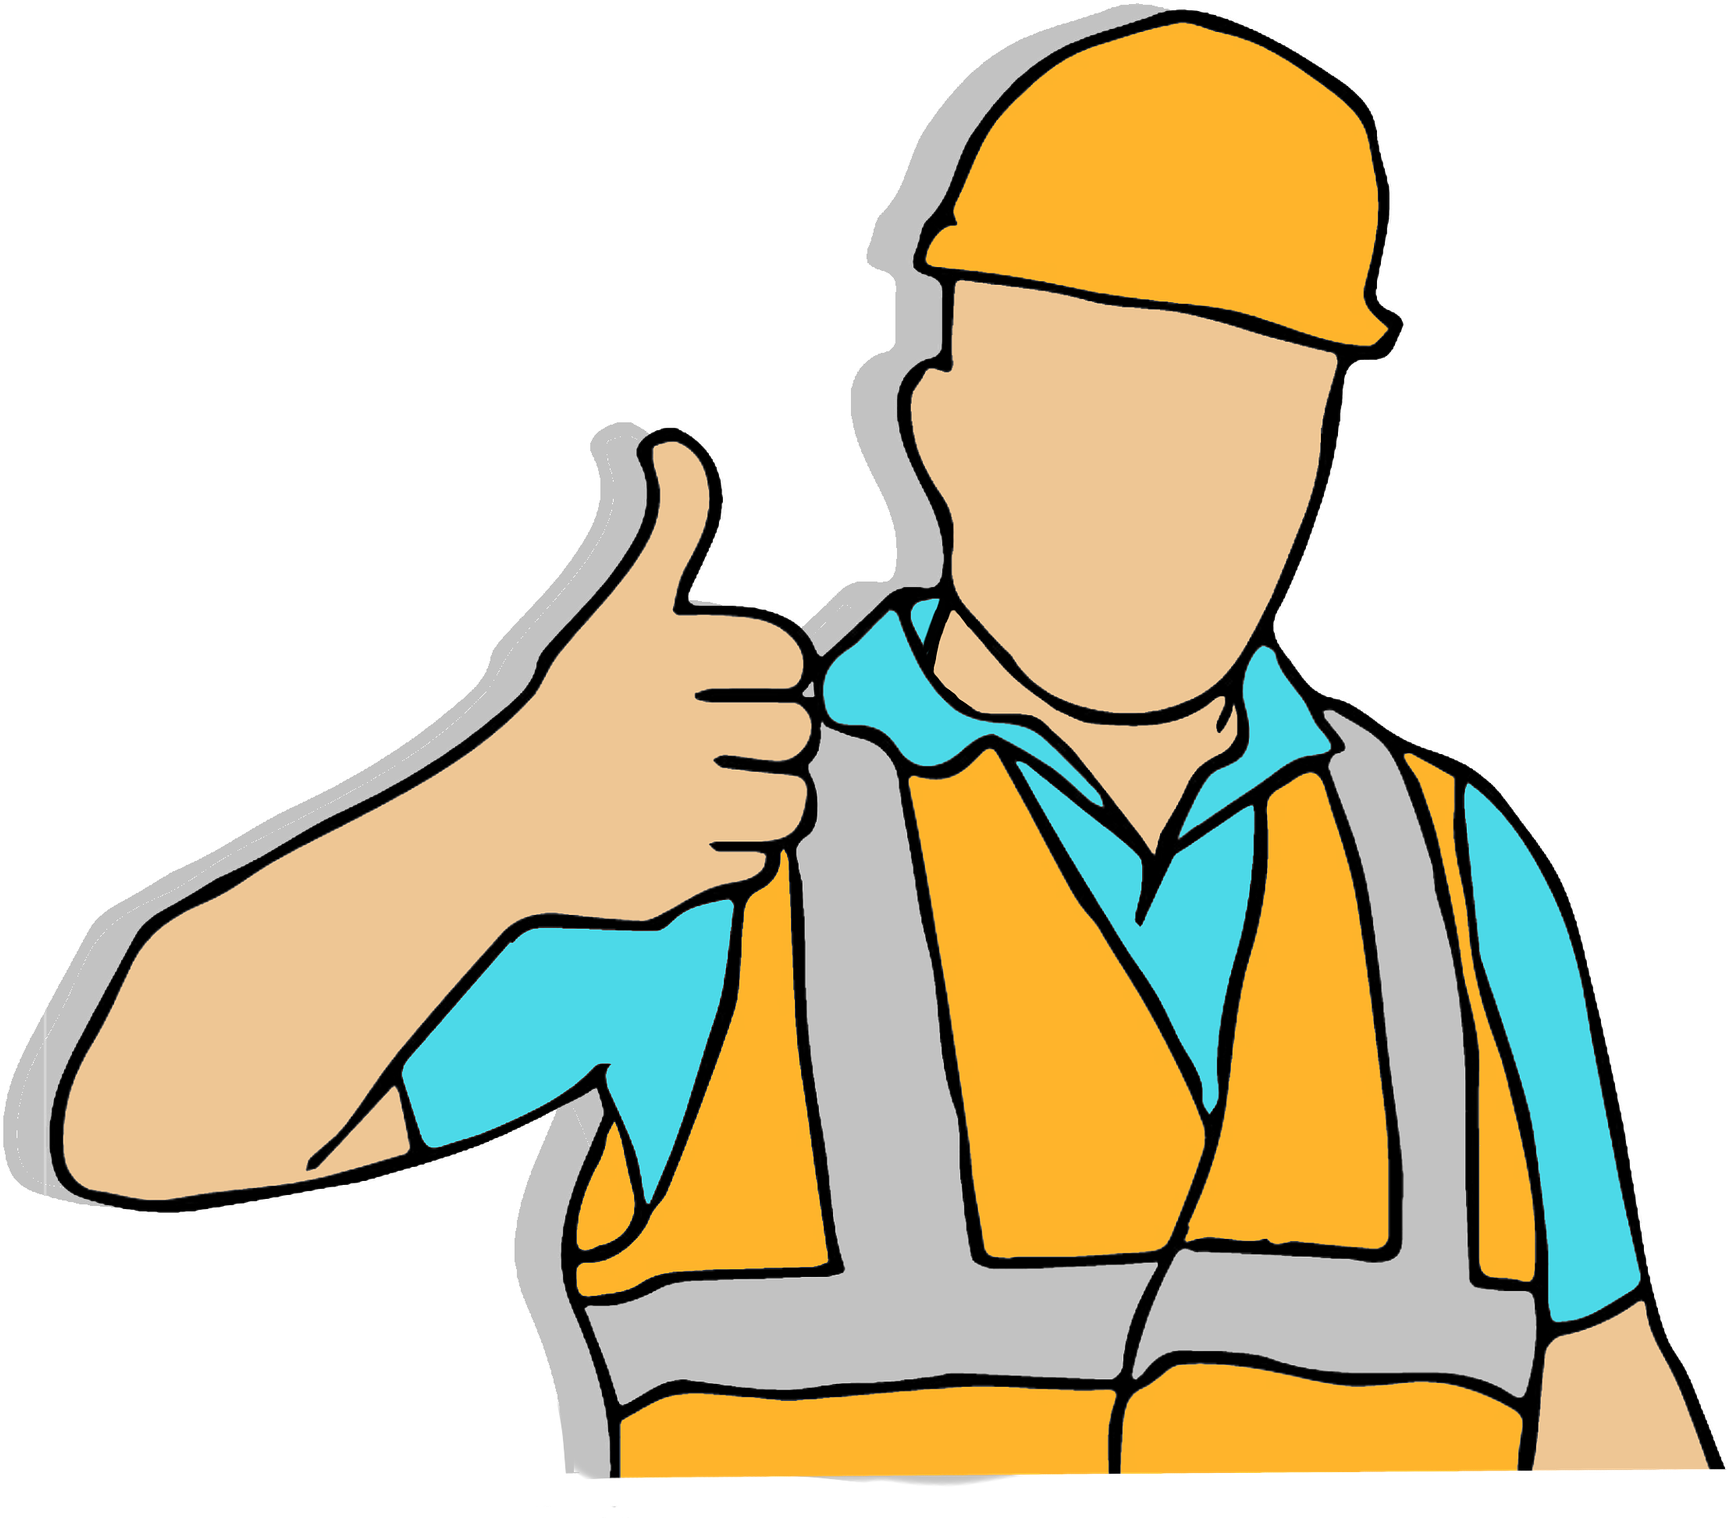 Boots Clipart Construction Worker - Boots Clipart Construction Worker.